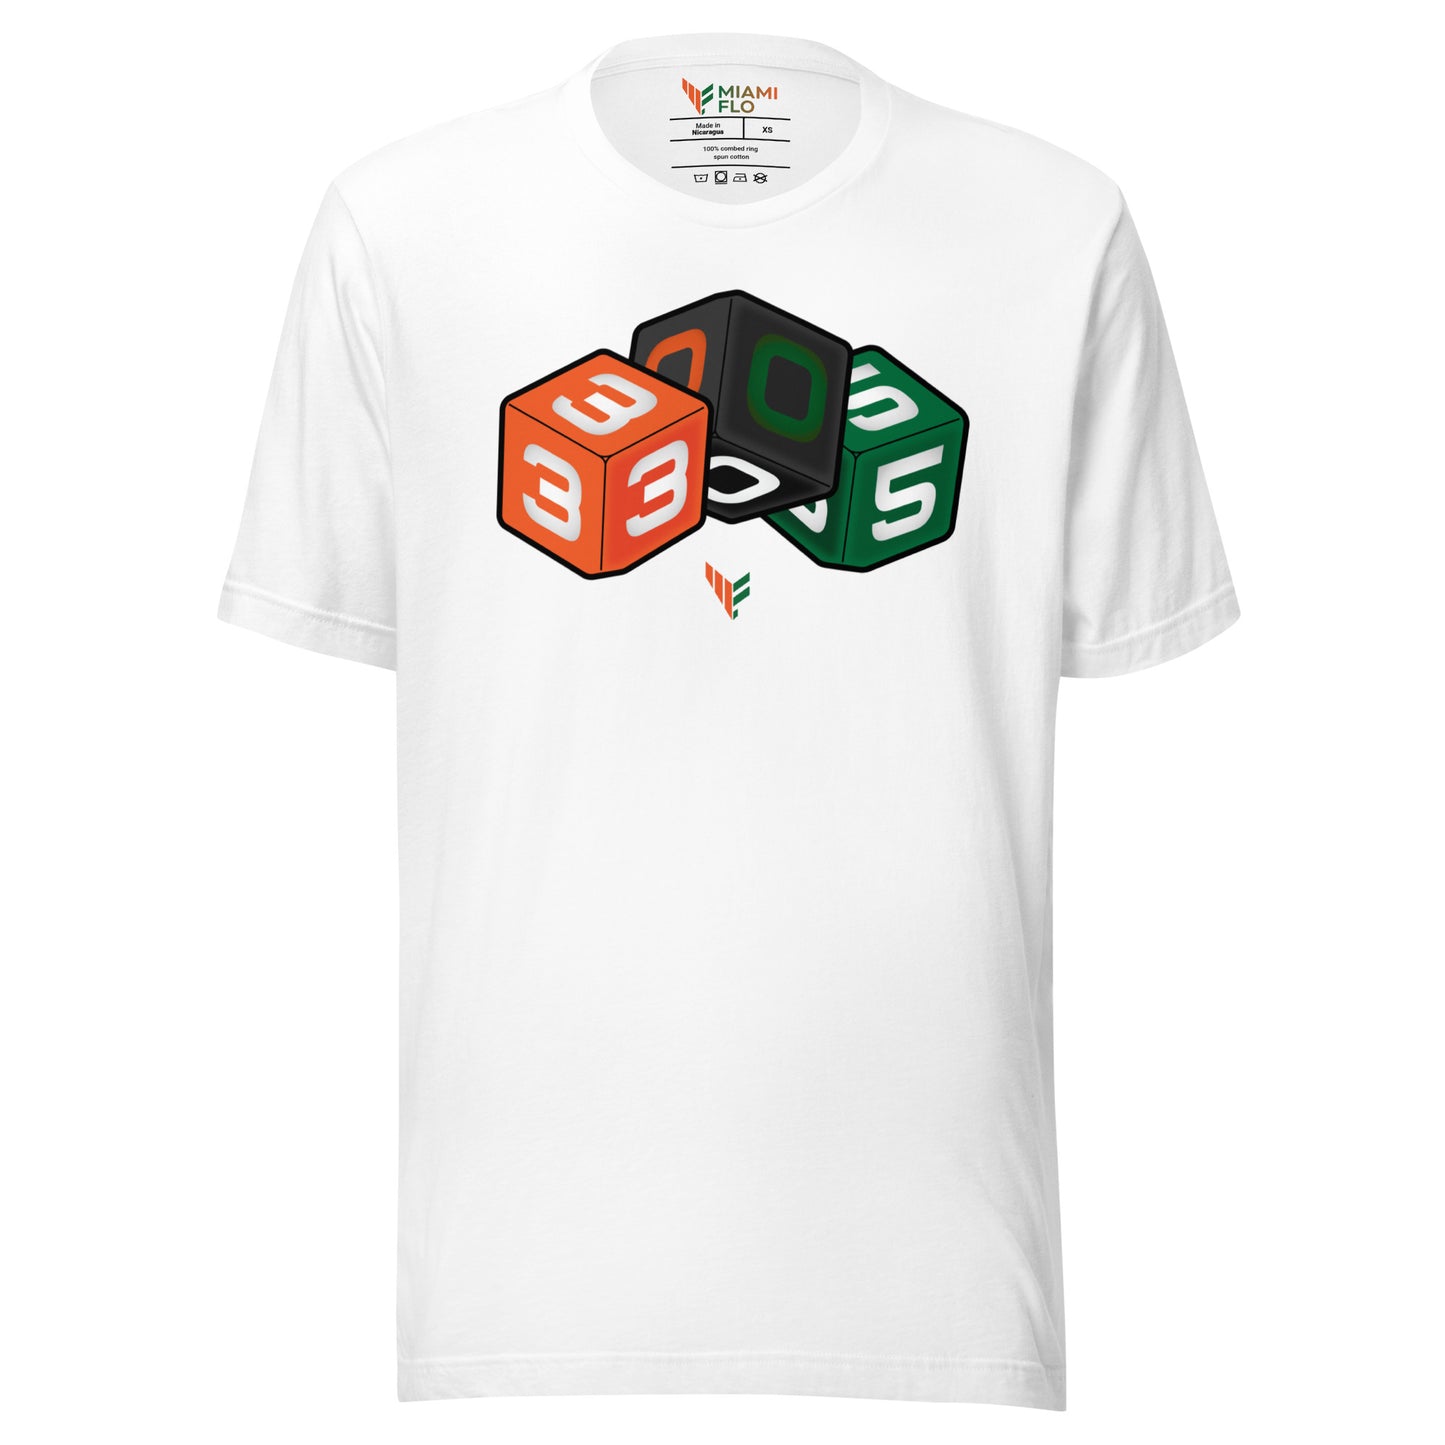 305 Dice Shirt - Designed by Jas